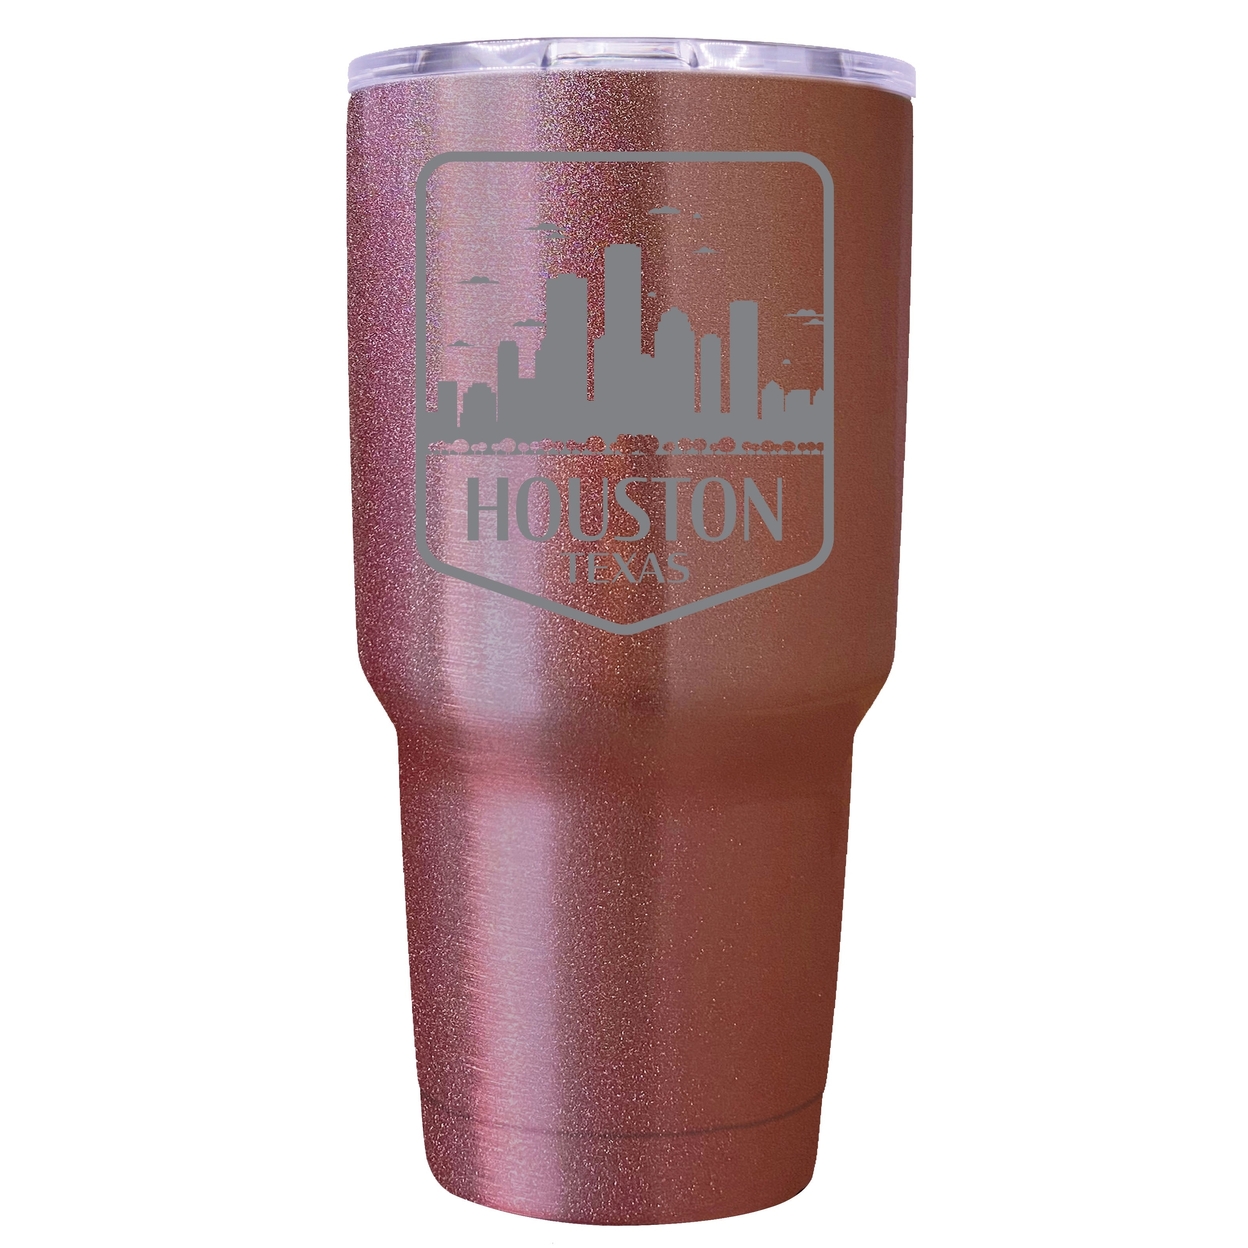 Houston Texas Souvenir 24 Oz Engraved Insulated Stainless Steel Tumbler - Rose Gold,,2-Pack